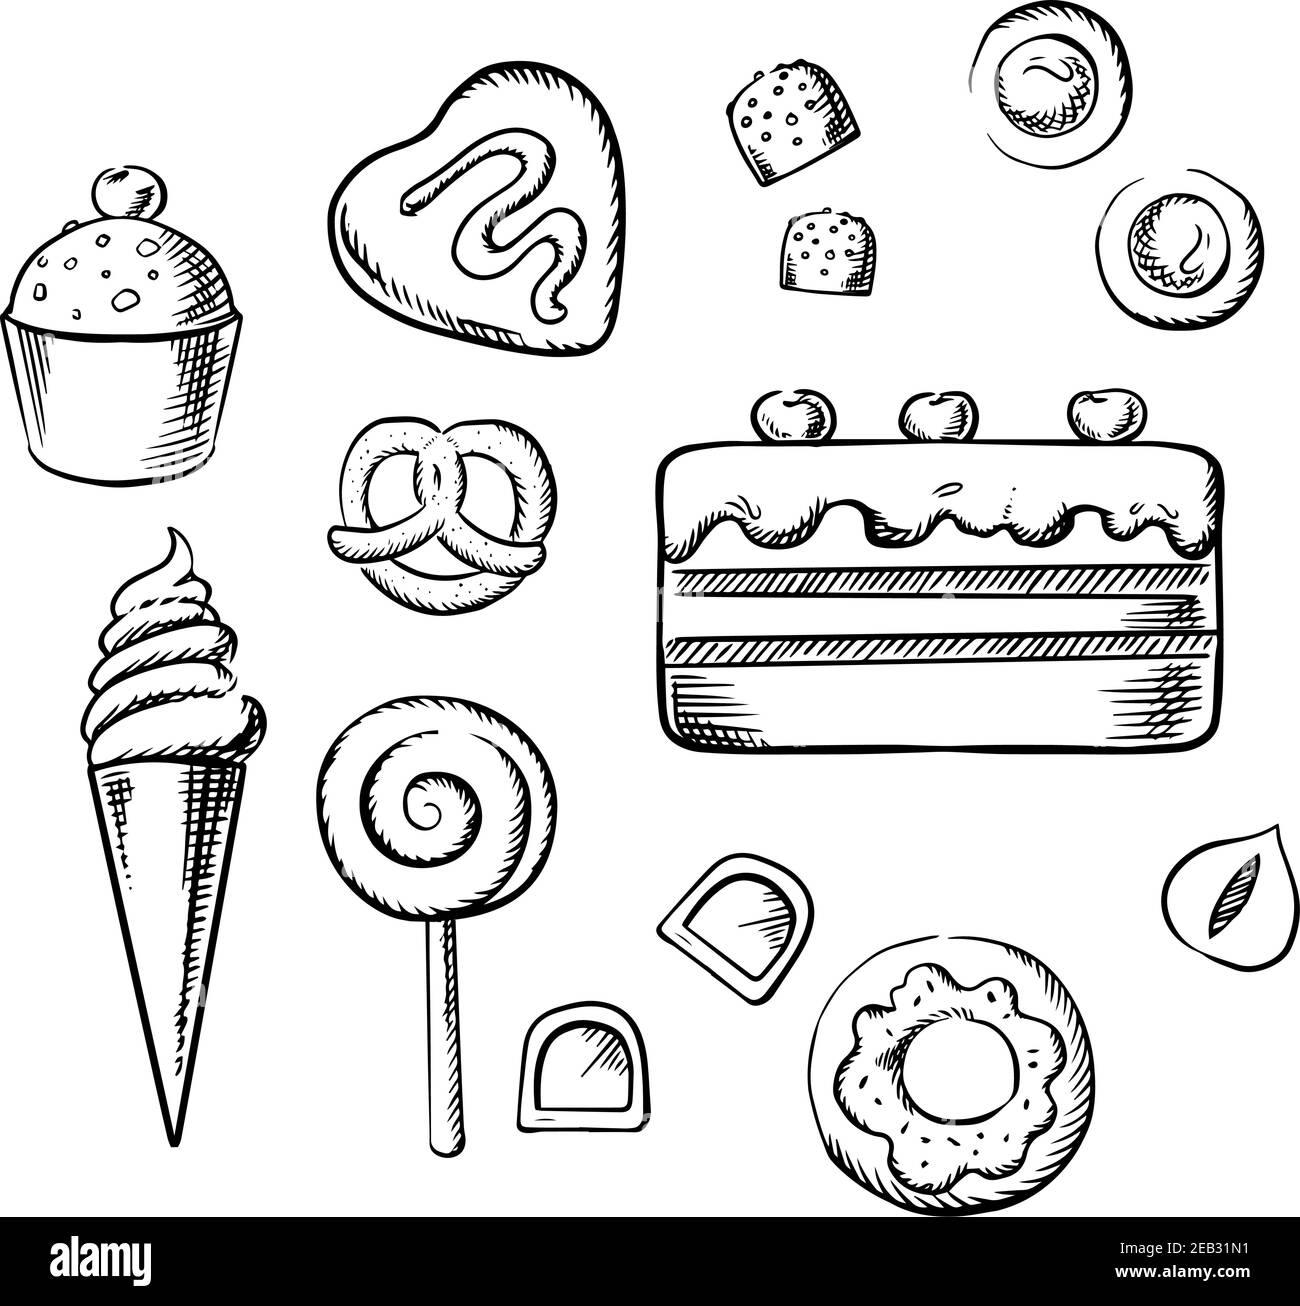 Sweet cake and cupcake with cream, ice cream cone, glazed doughnut, chocolate candies with hazelnuts and fondant, cookies, lollipop and pretzel. Sketc Stock Vector